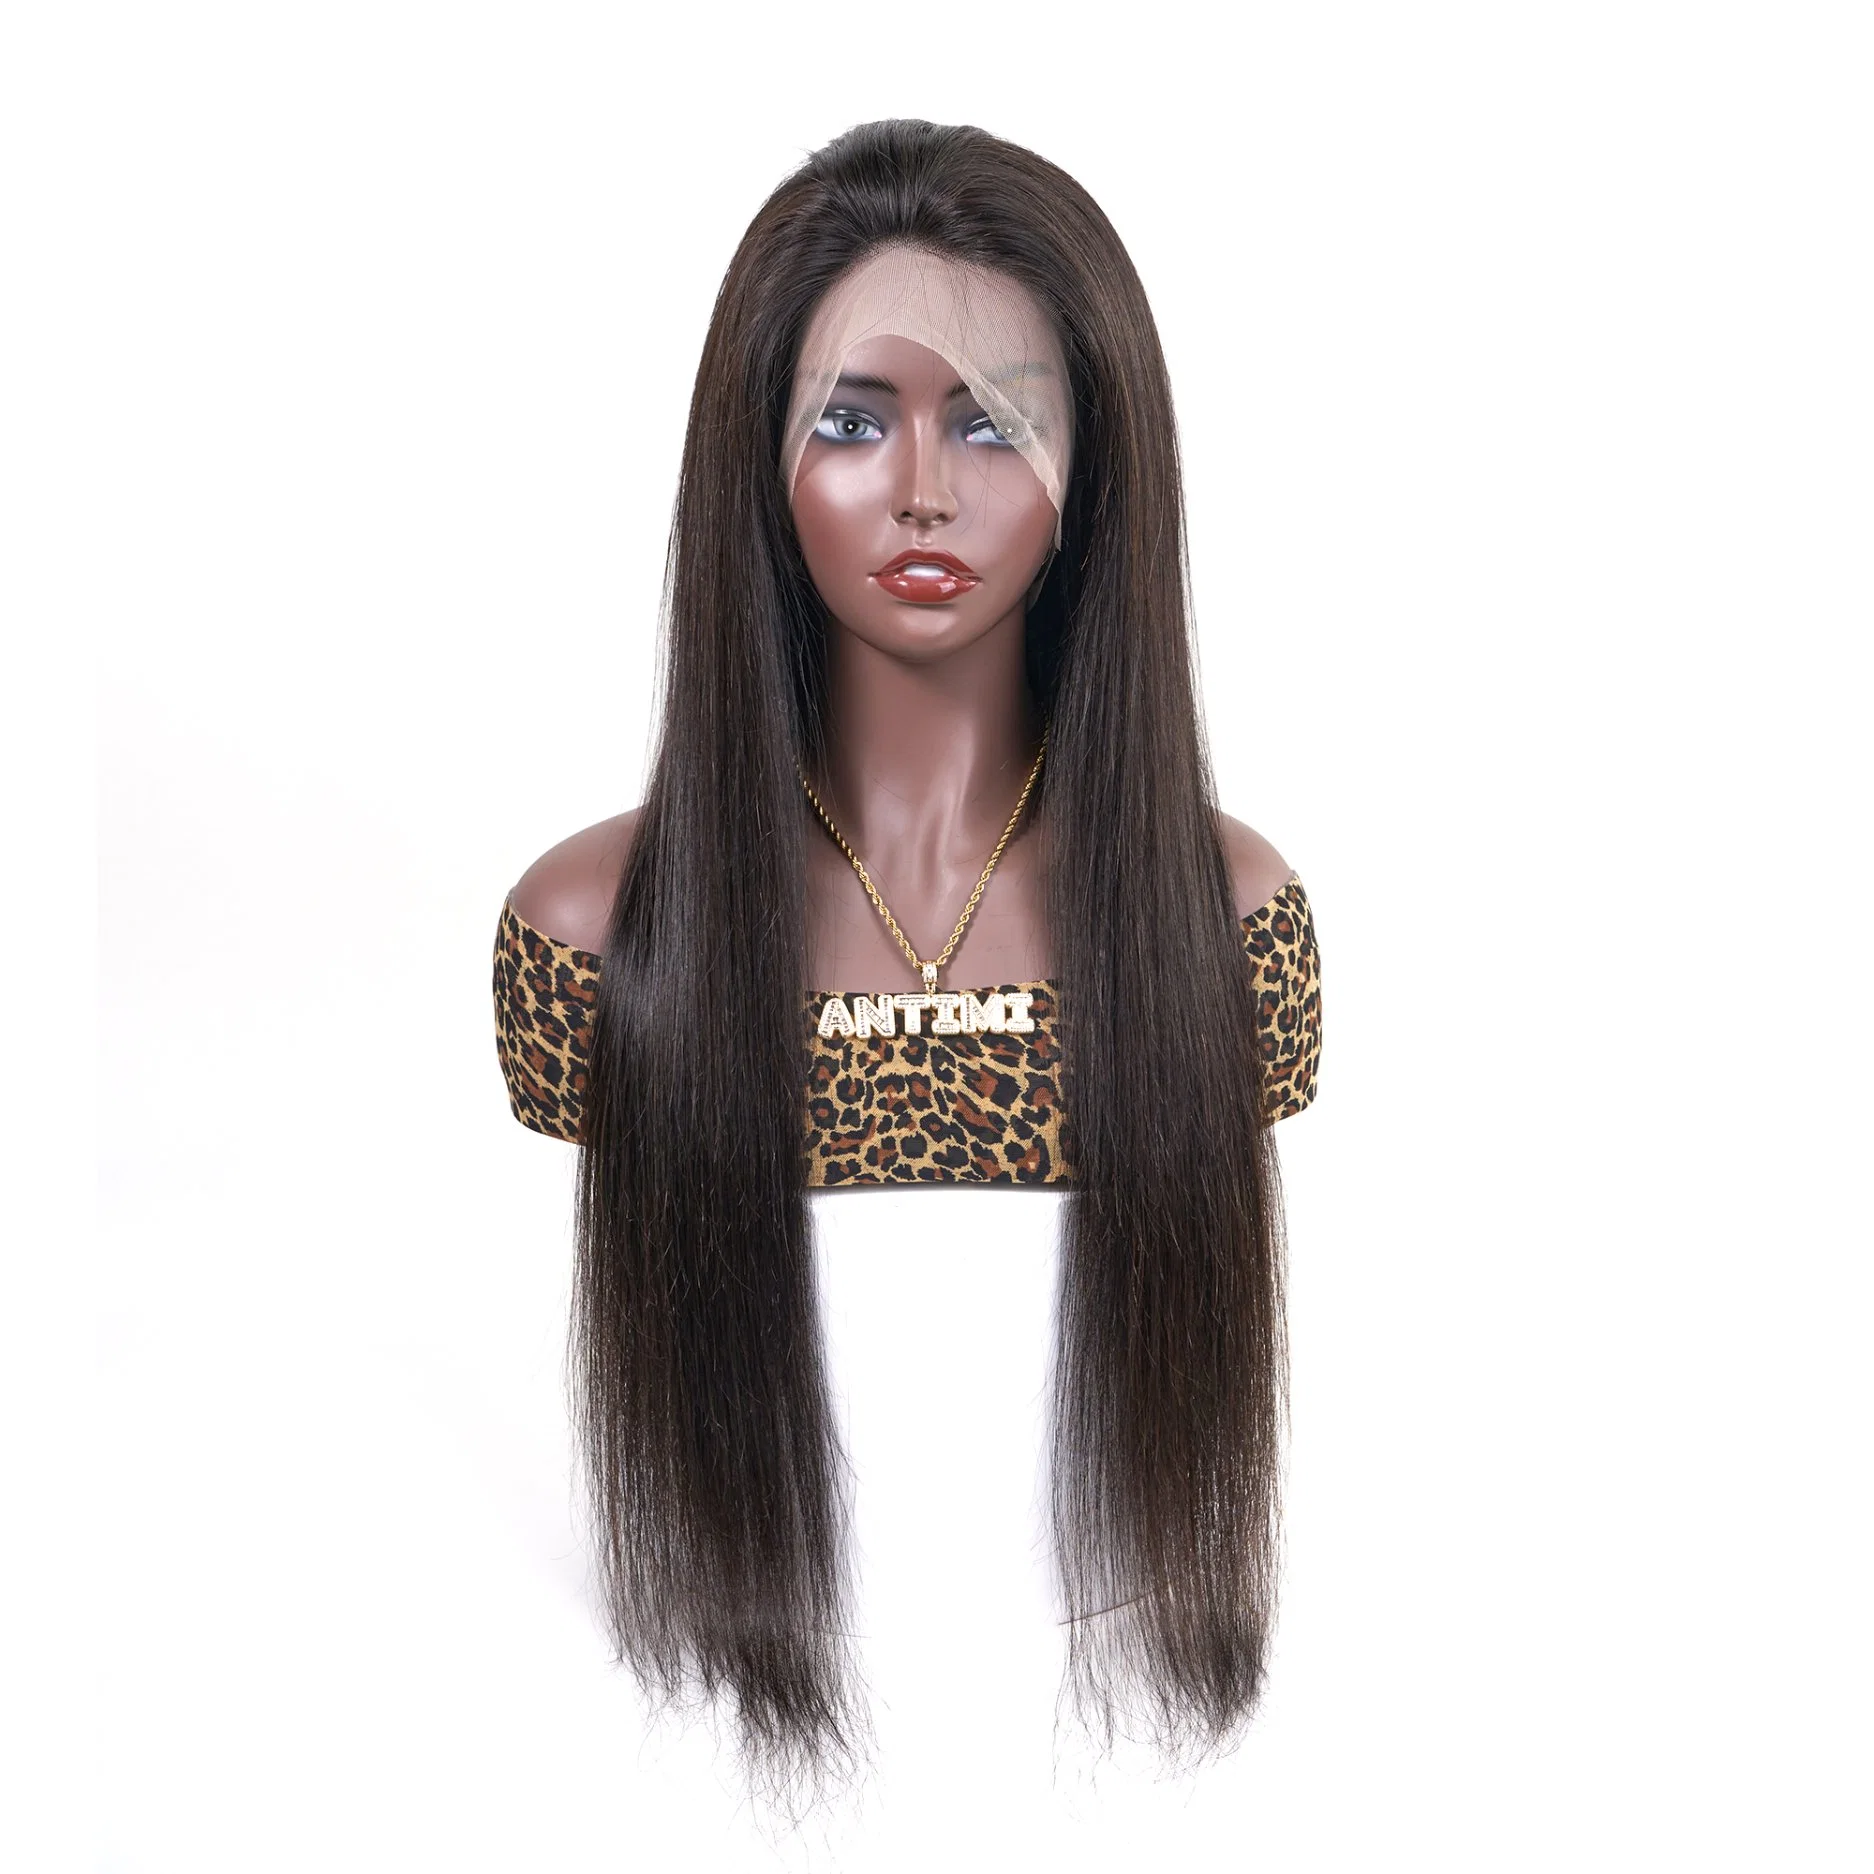 China Wholesale Cheap Hand Made Brazilian Virgin Remy Long Human Hair Natural Bone Straight 360 Full HD Transparent Swiss Lace Front Wigs for Black Women